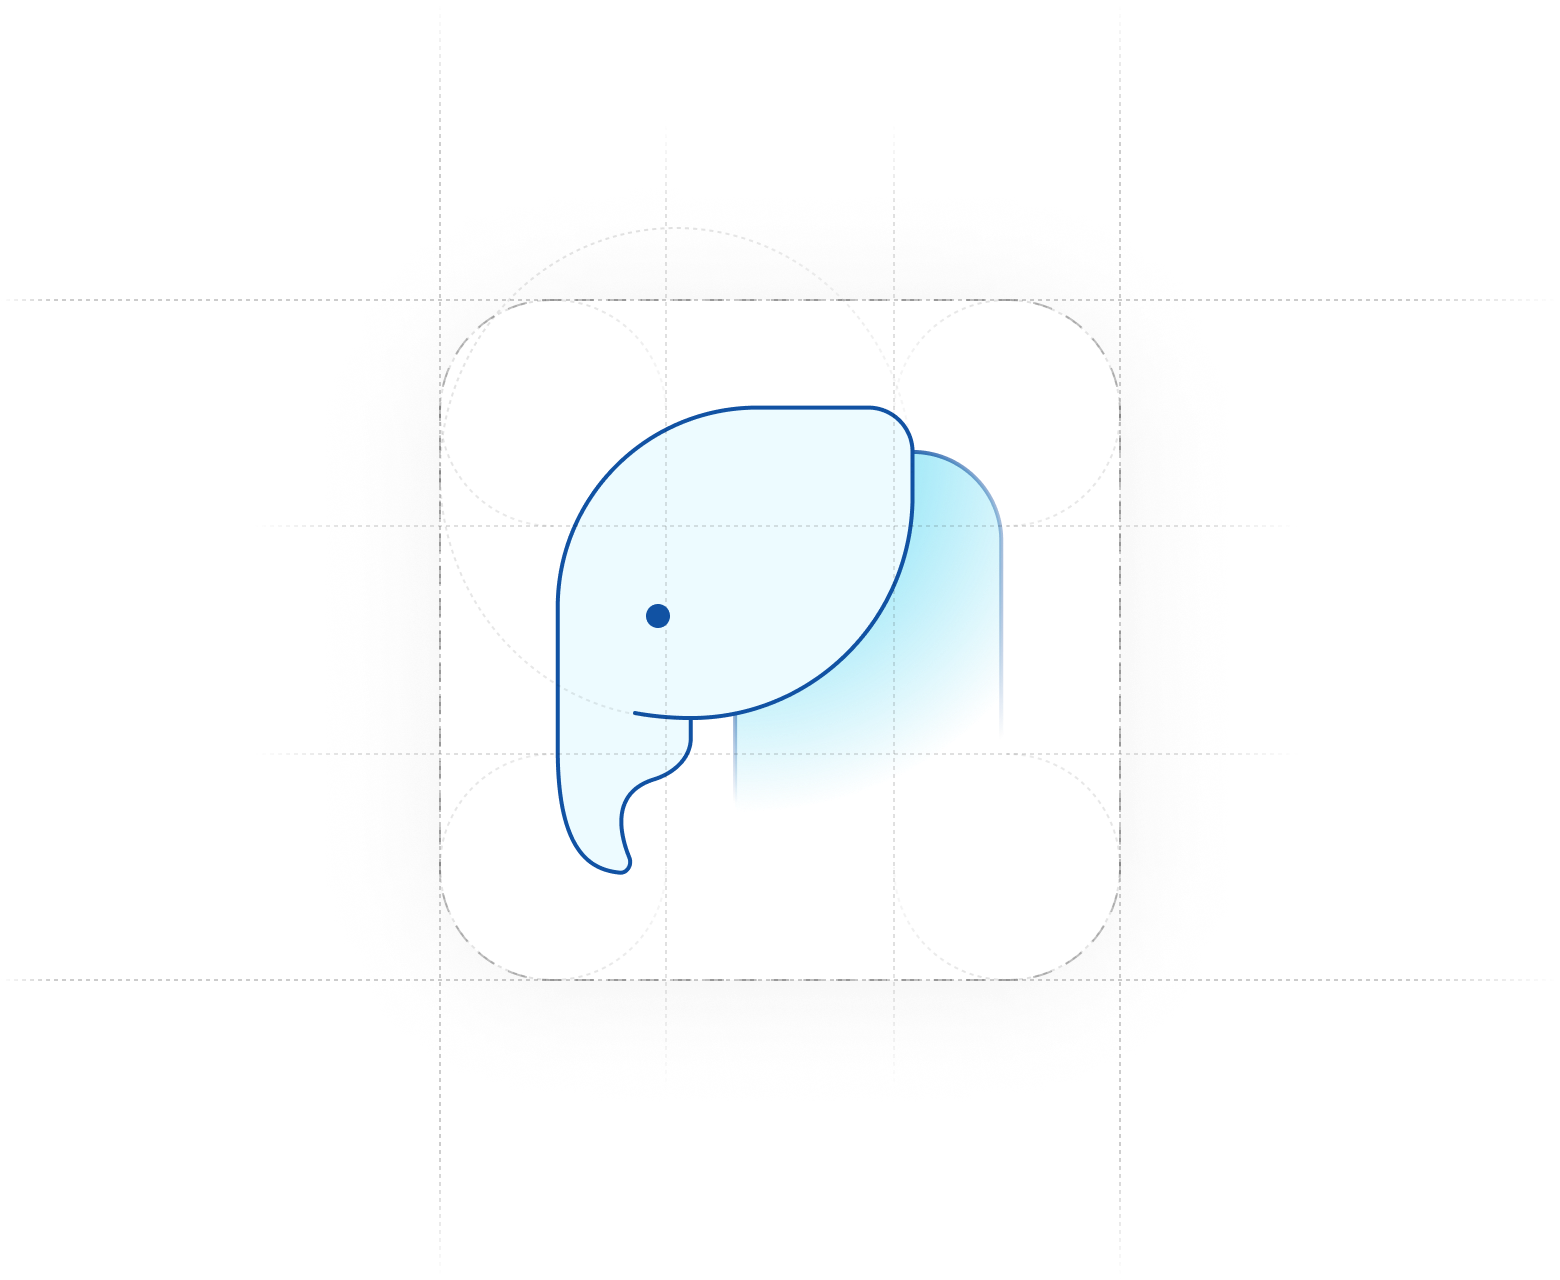 A whimsical illustration of an elephant's head sits inside a square with rounded edges and a dashed border.